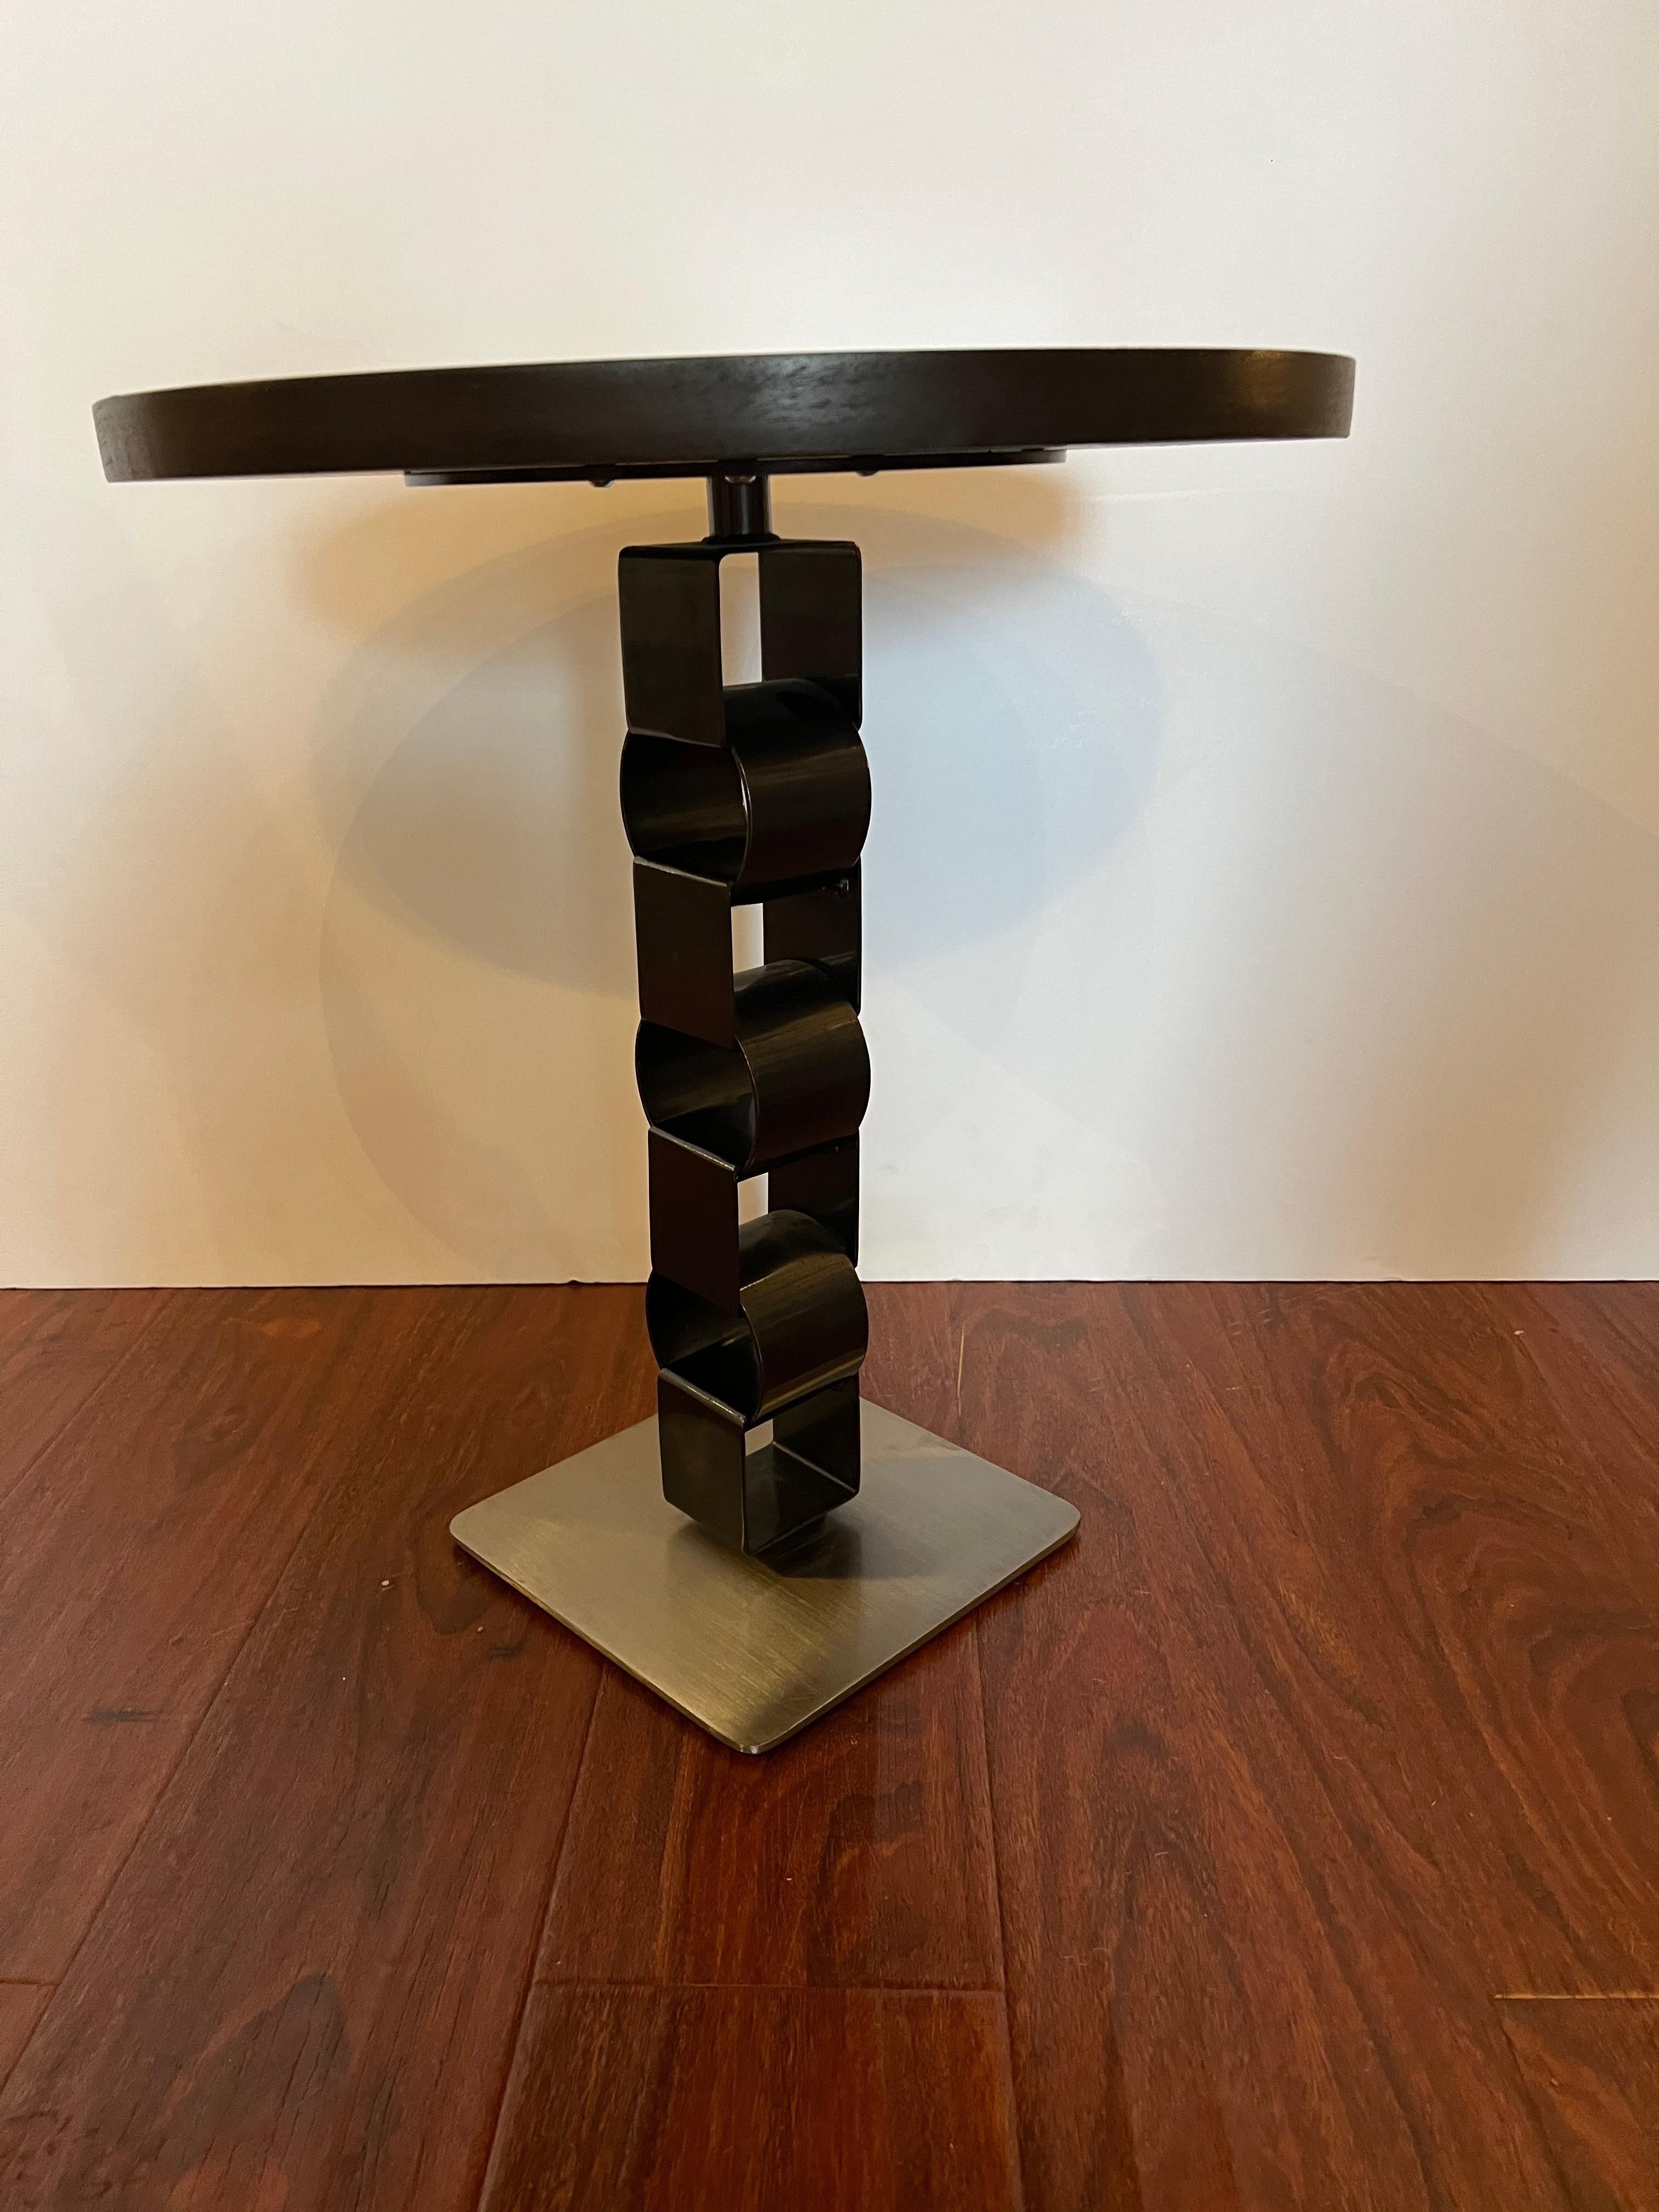 This modern round black gueridon is artfully designed with a combination of brush and lacquered steel. The graceful curves of its steel base flow together elegantly for a sophisticated look and a contemporary appeal. Its top is made of dark stained